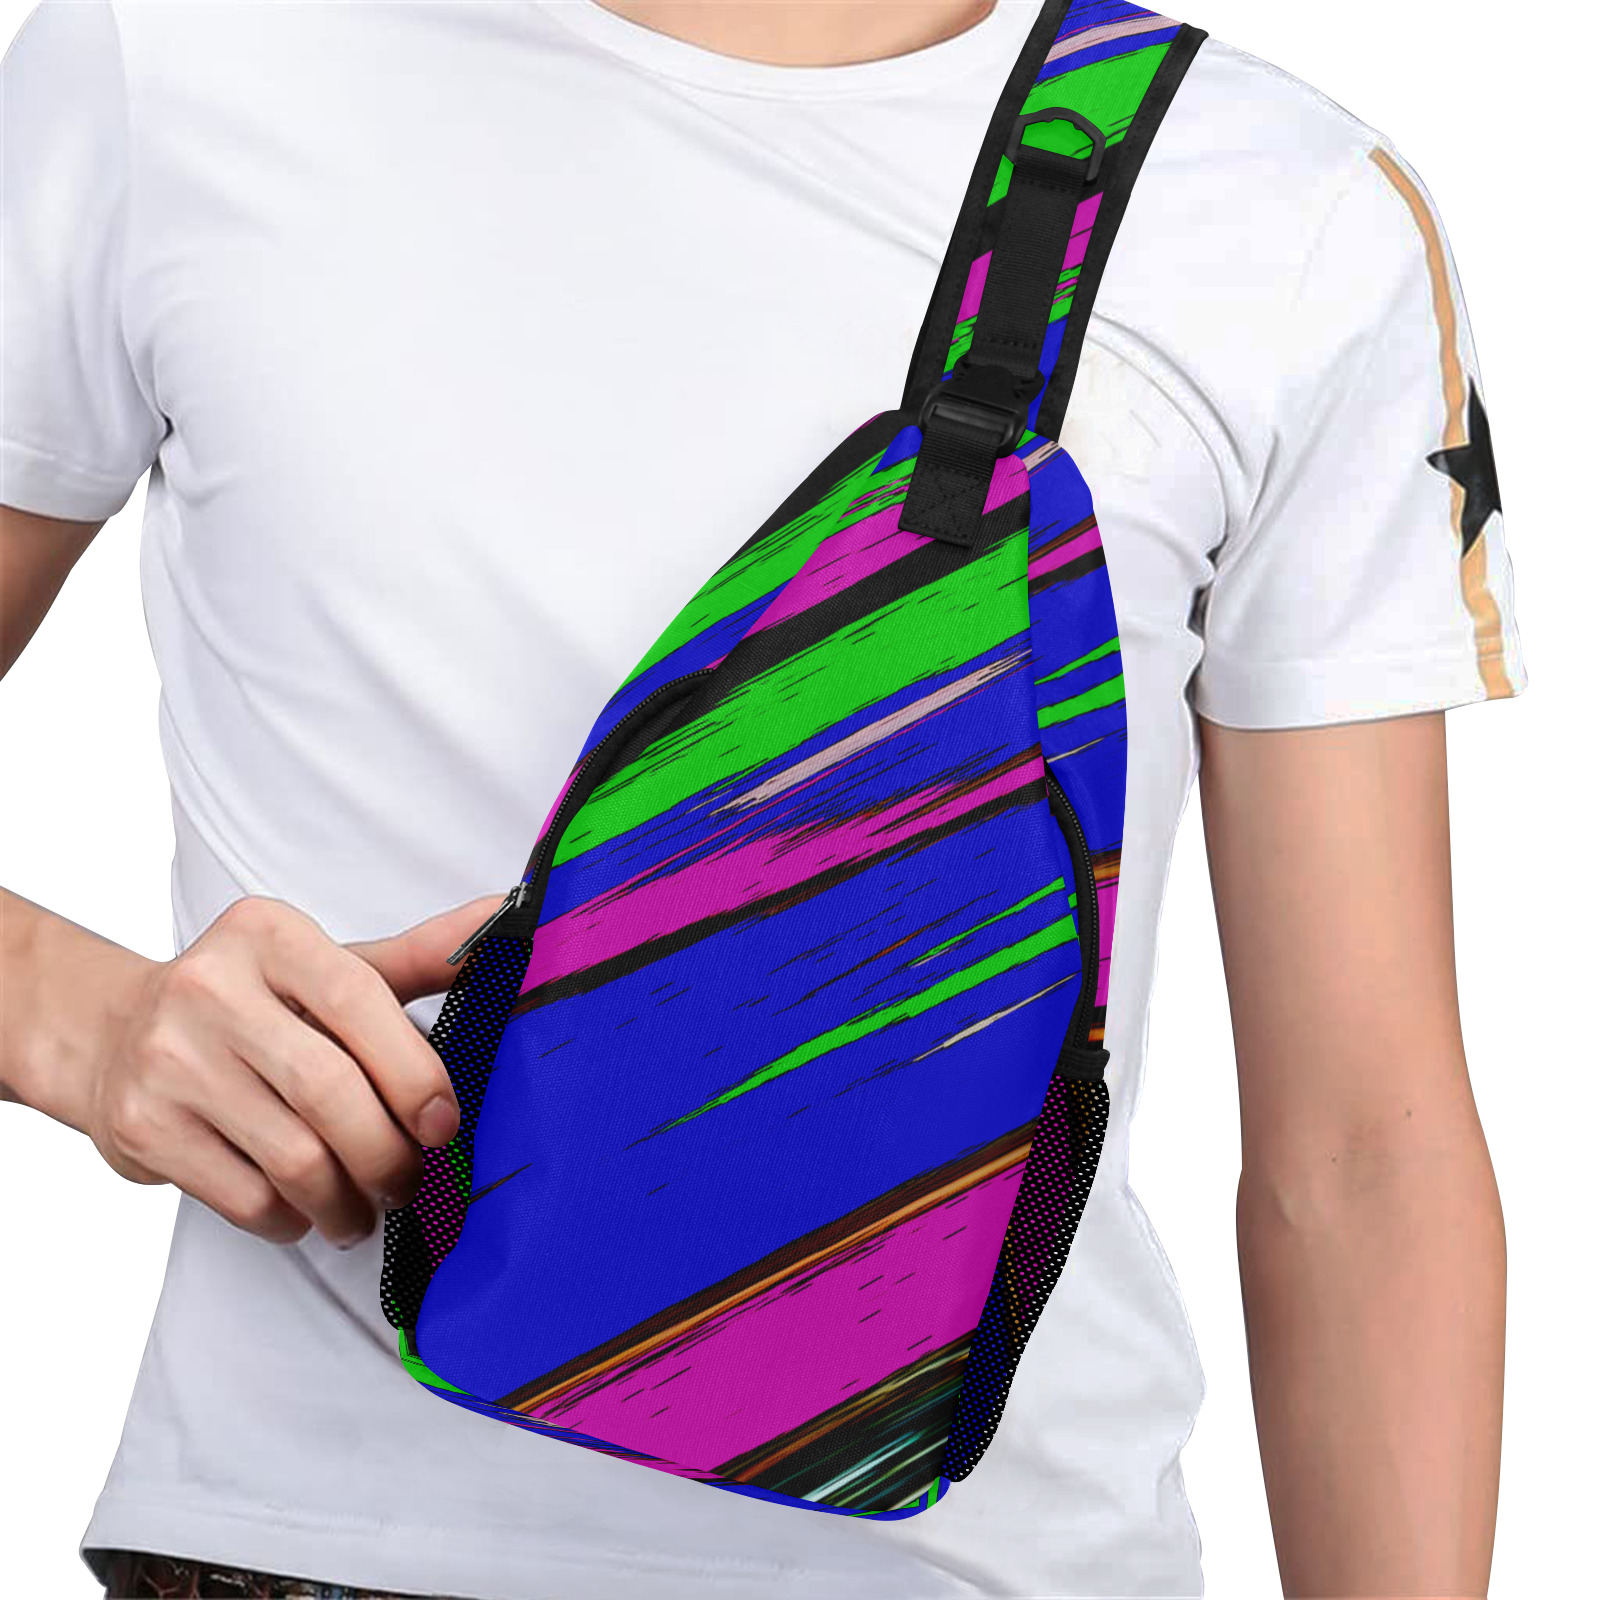 Diagonal Green Blue Purple And Black Abstract Art Men's Casual Chest Bag (Model 1729)